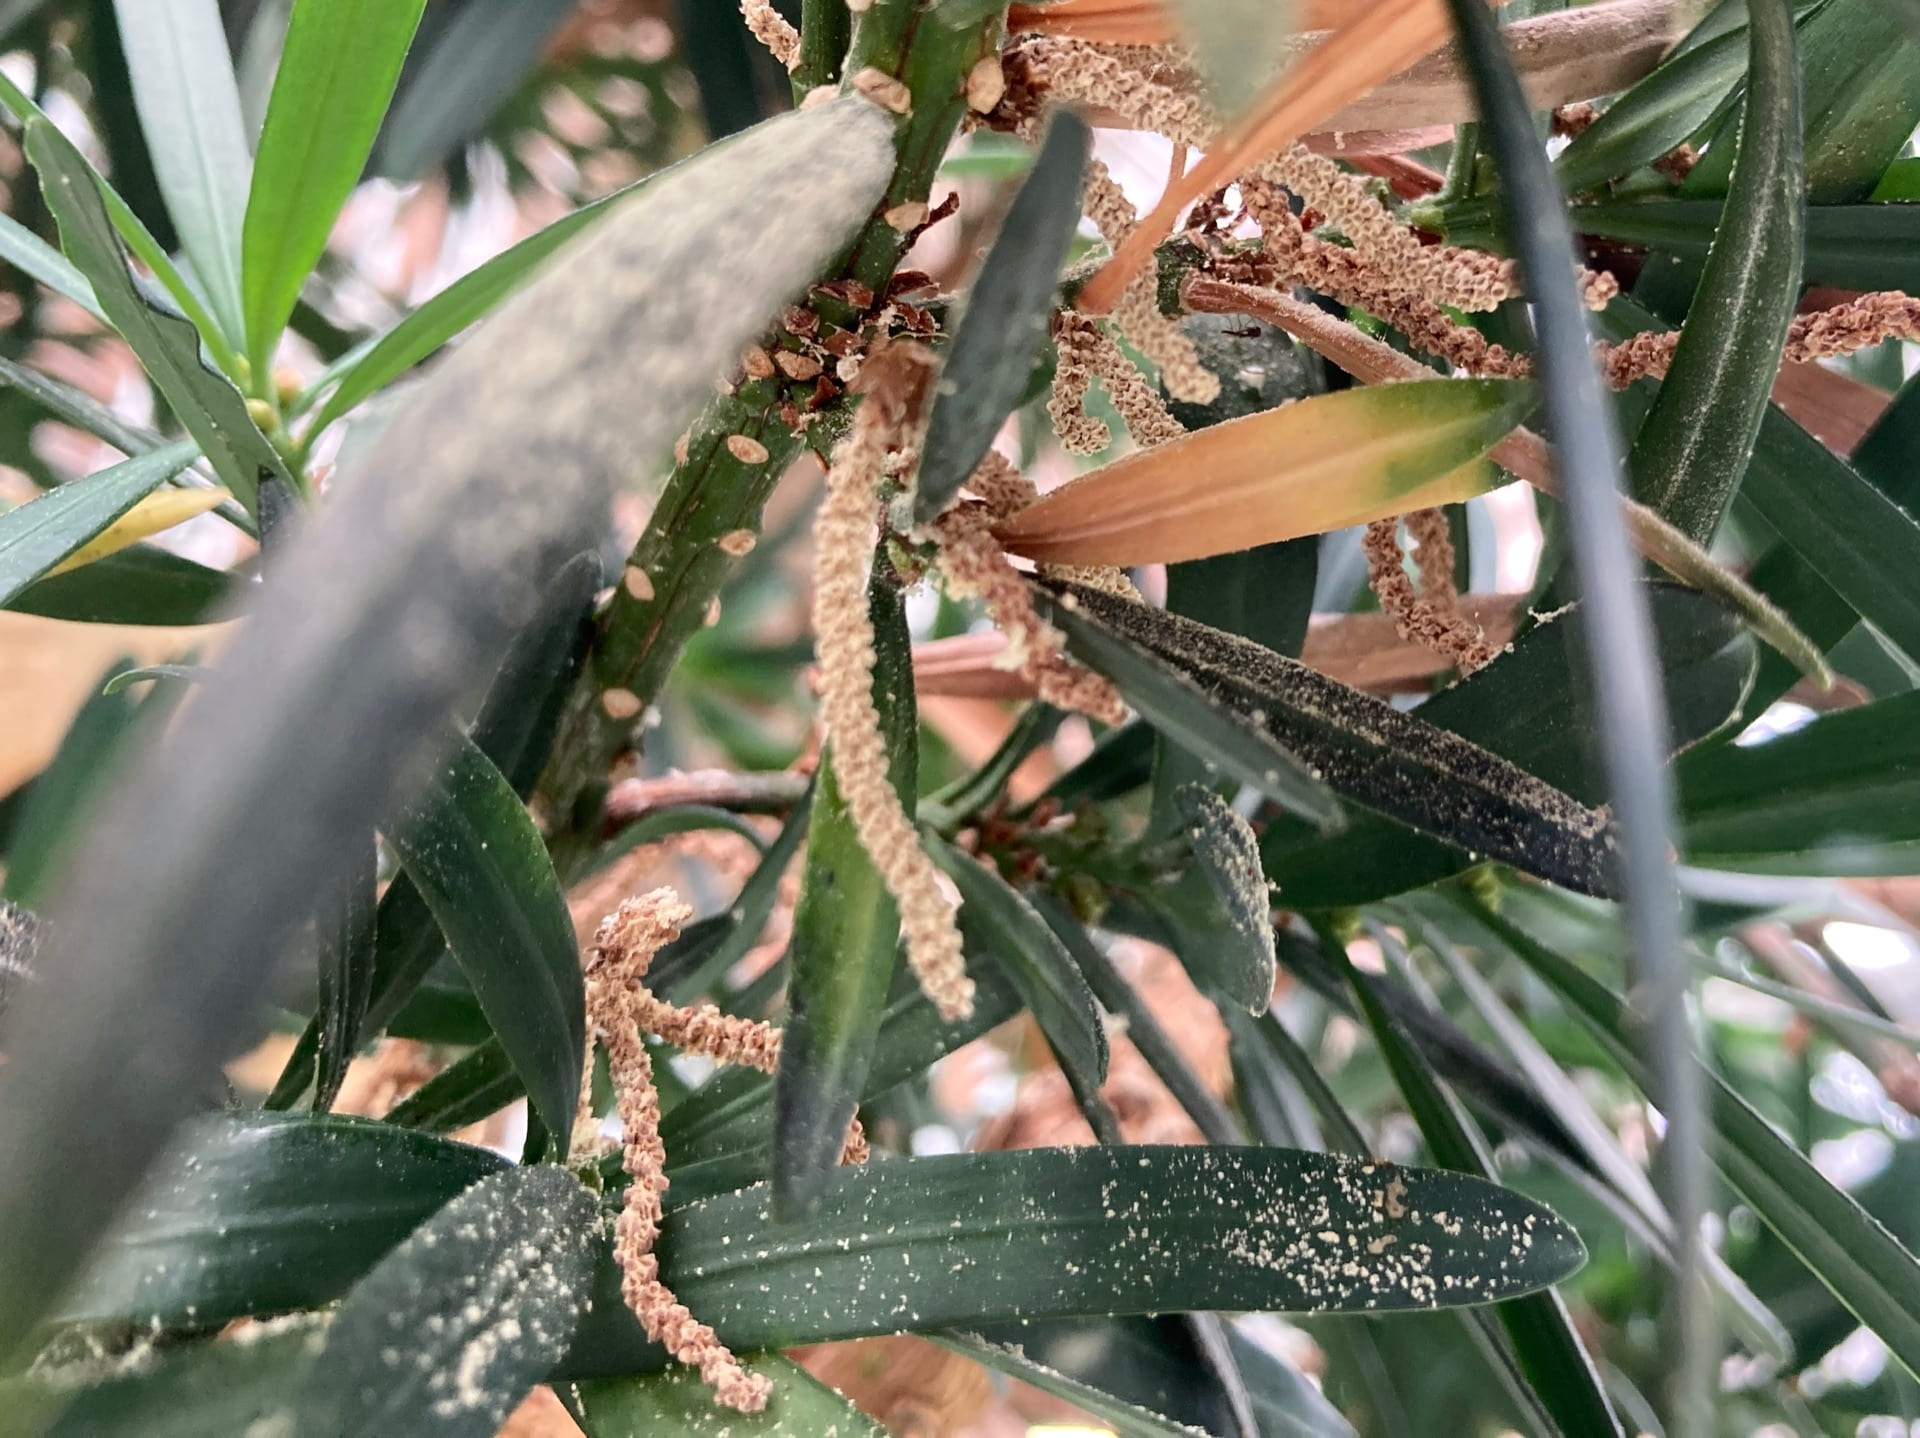 Plants can be either monoecious (having all reproductive parts on the same plant) or dioecious (having pollen bearing and seed bearing parts on different plants). This Podocarpus macrophyllus is dioecious, with the pollen bearing cones visible.